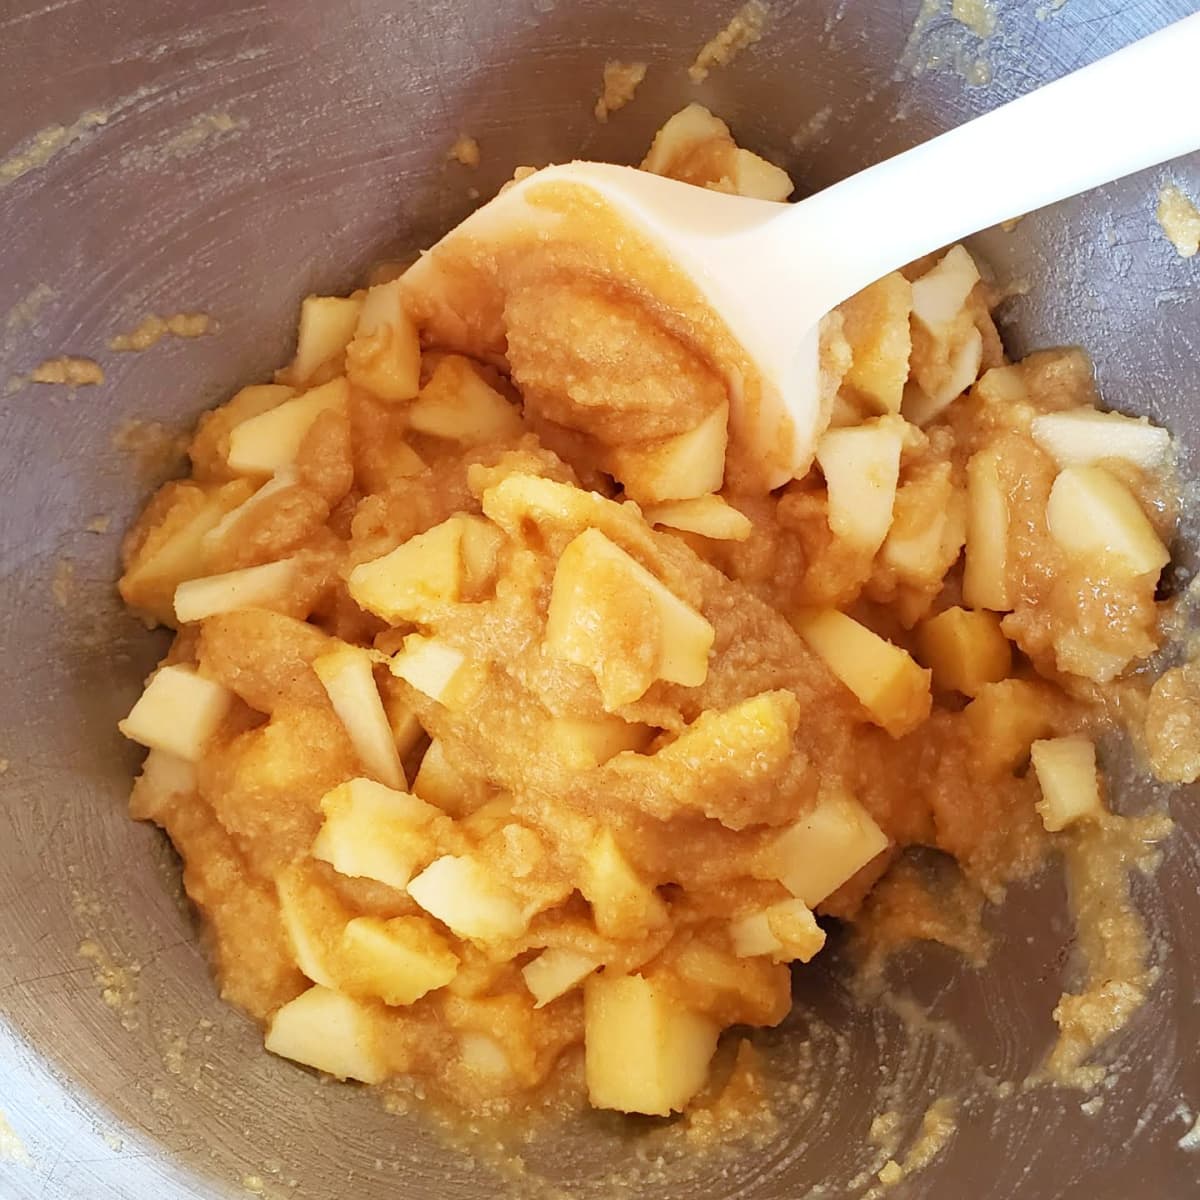 White spoon stirs chunky apples into batter in grey bowl